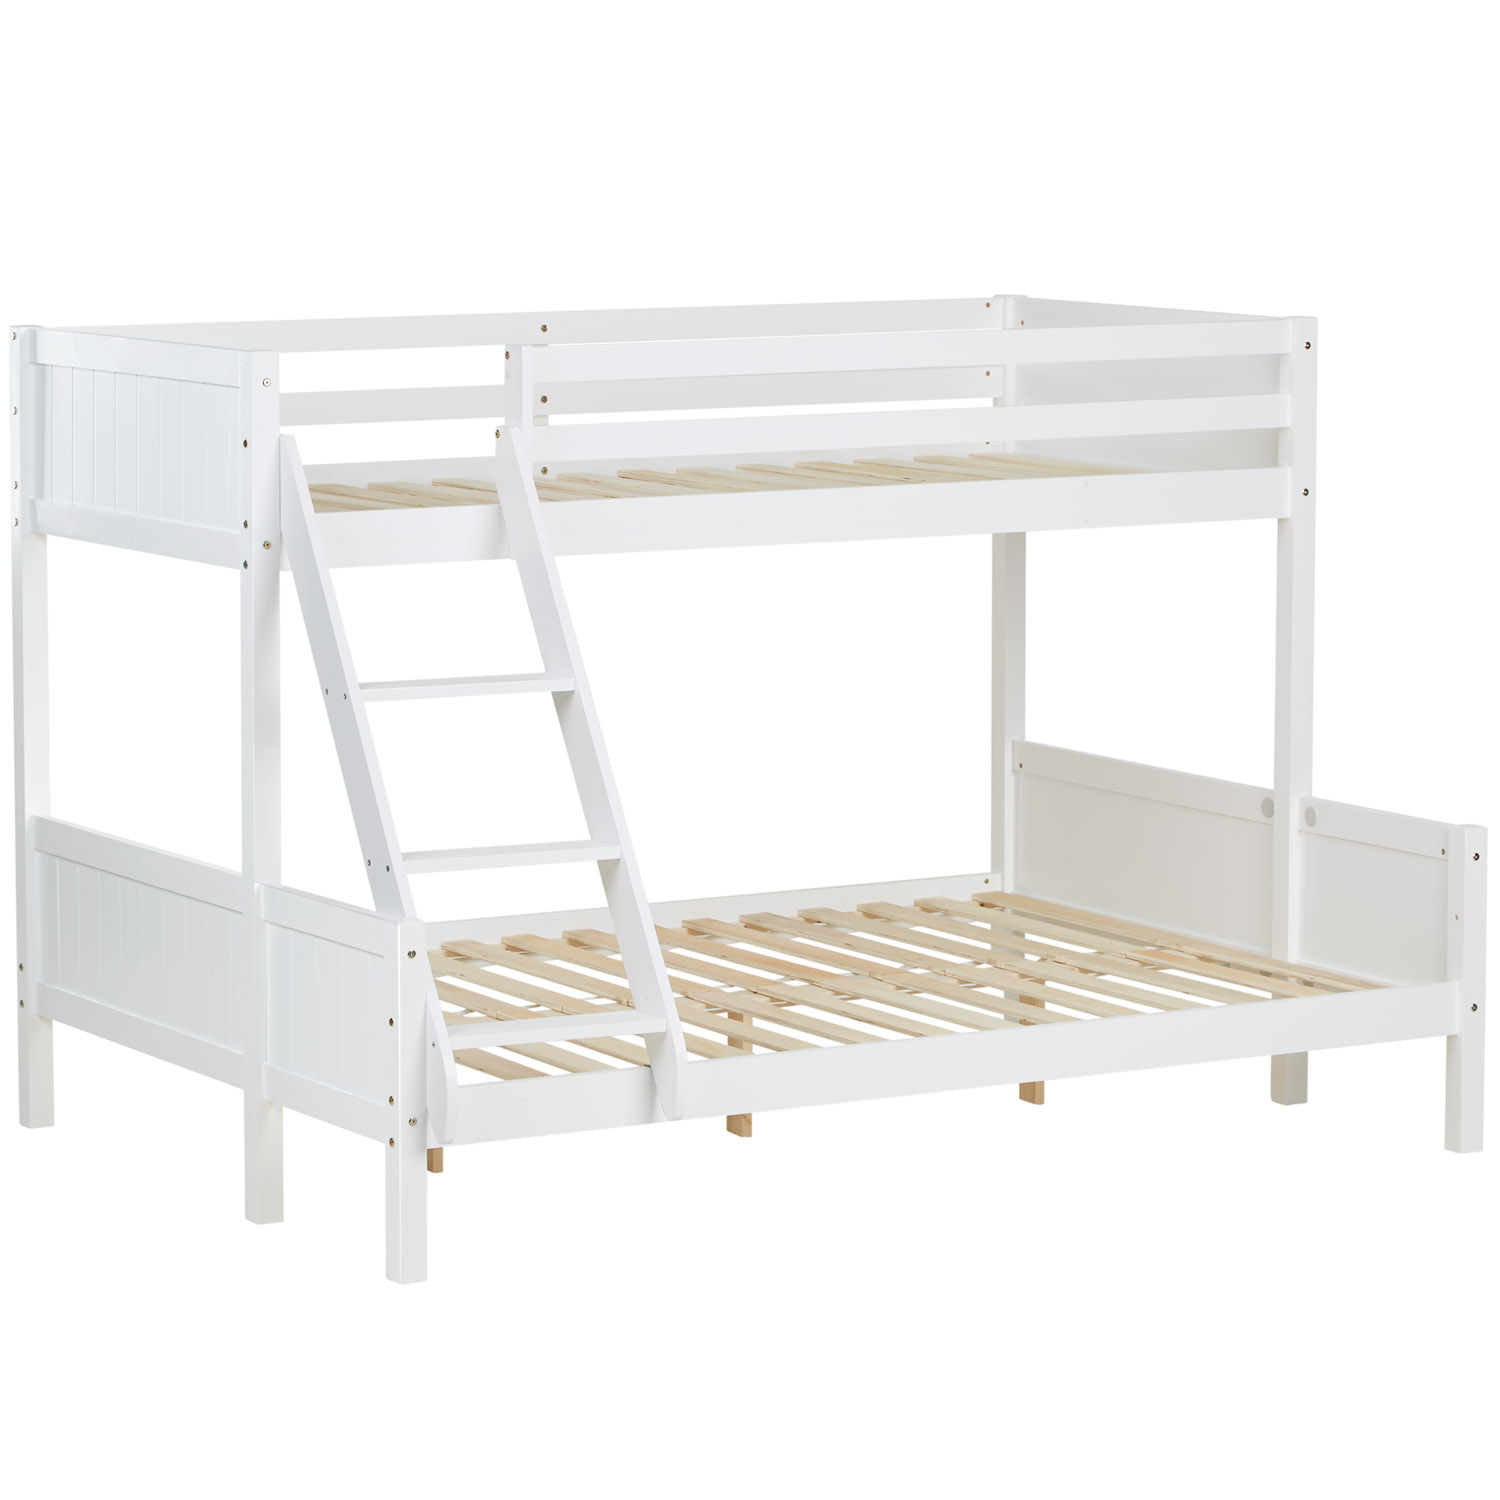 Children´s Bed Bunk Bed 90x200 and 140x200 High Sleeper Cot White Wood with Slats 2 Matresses